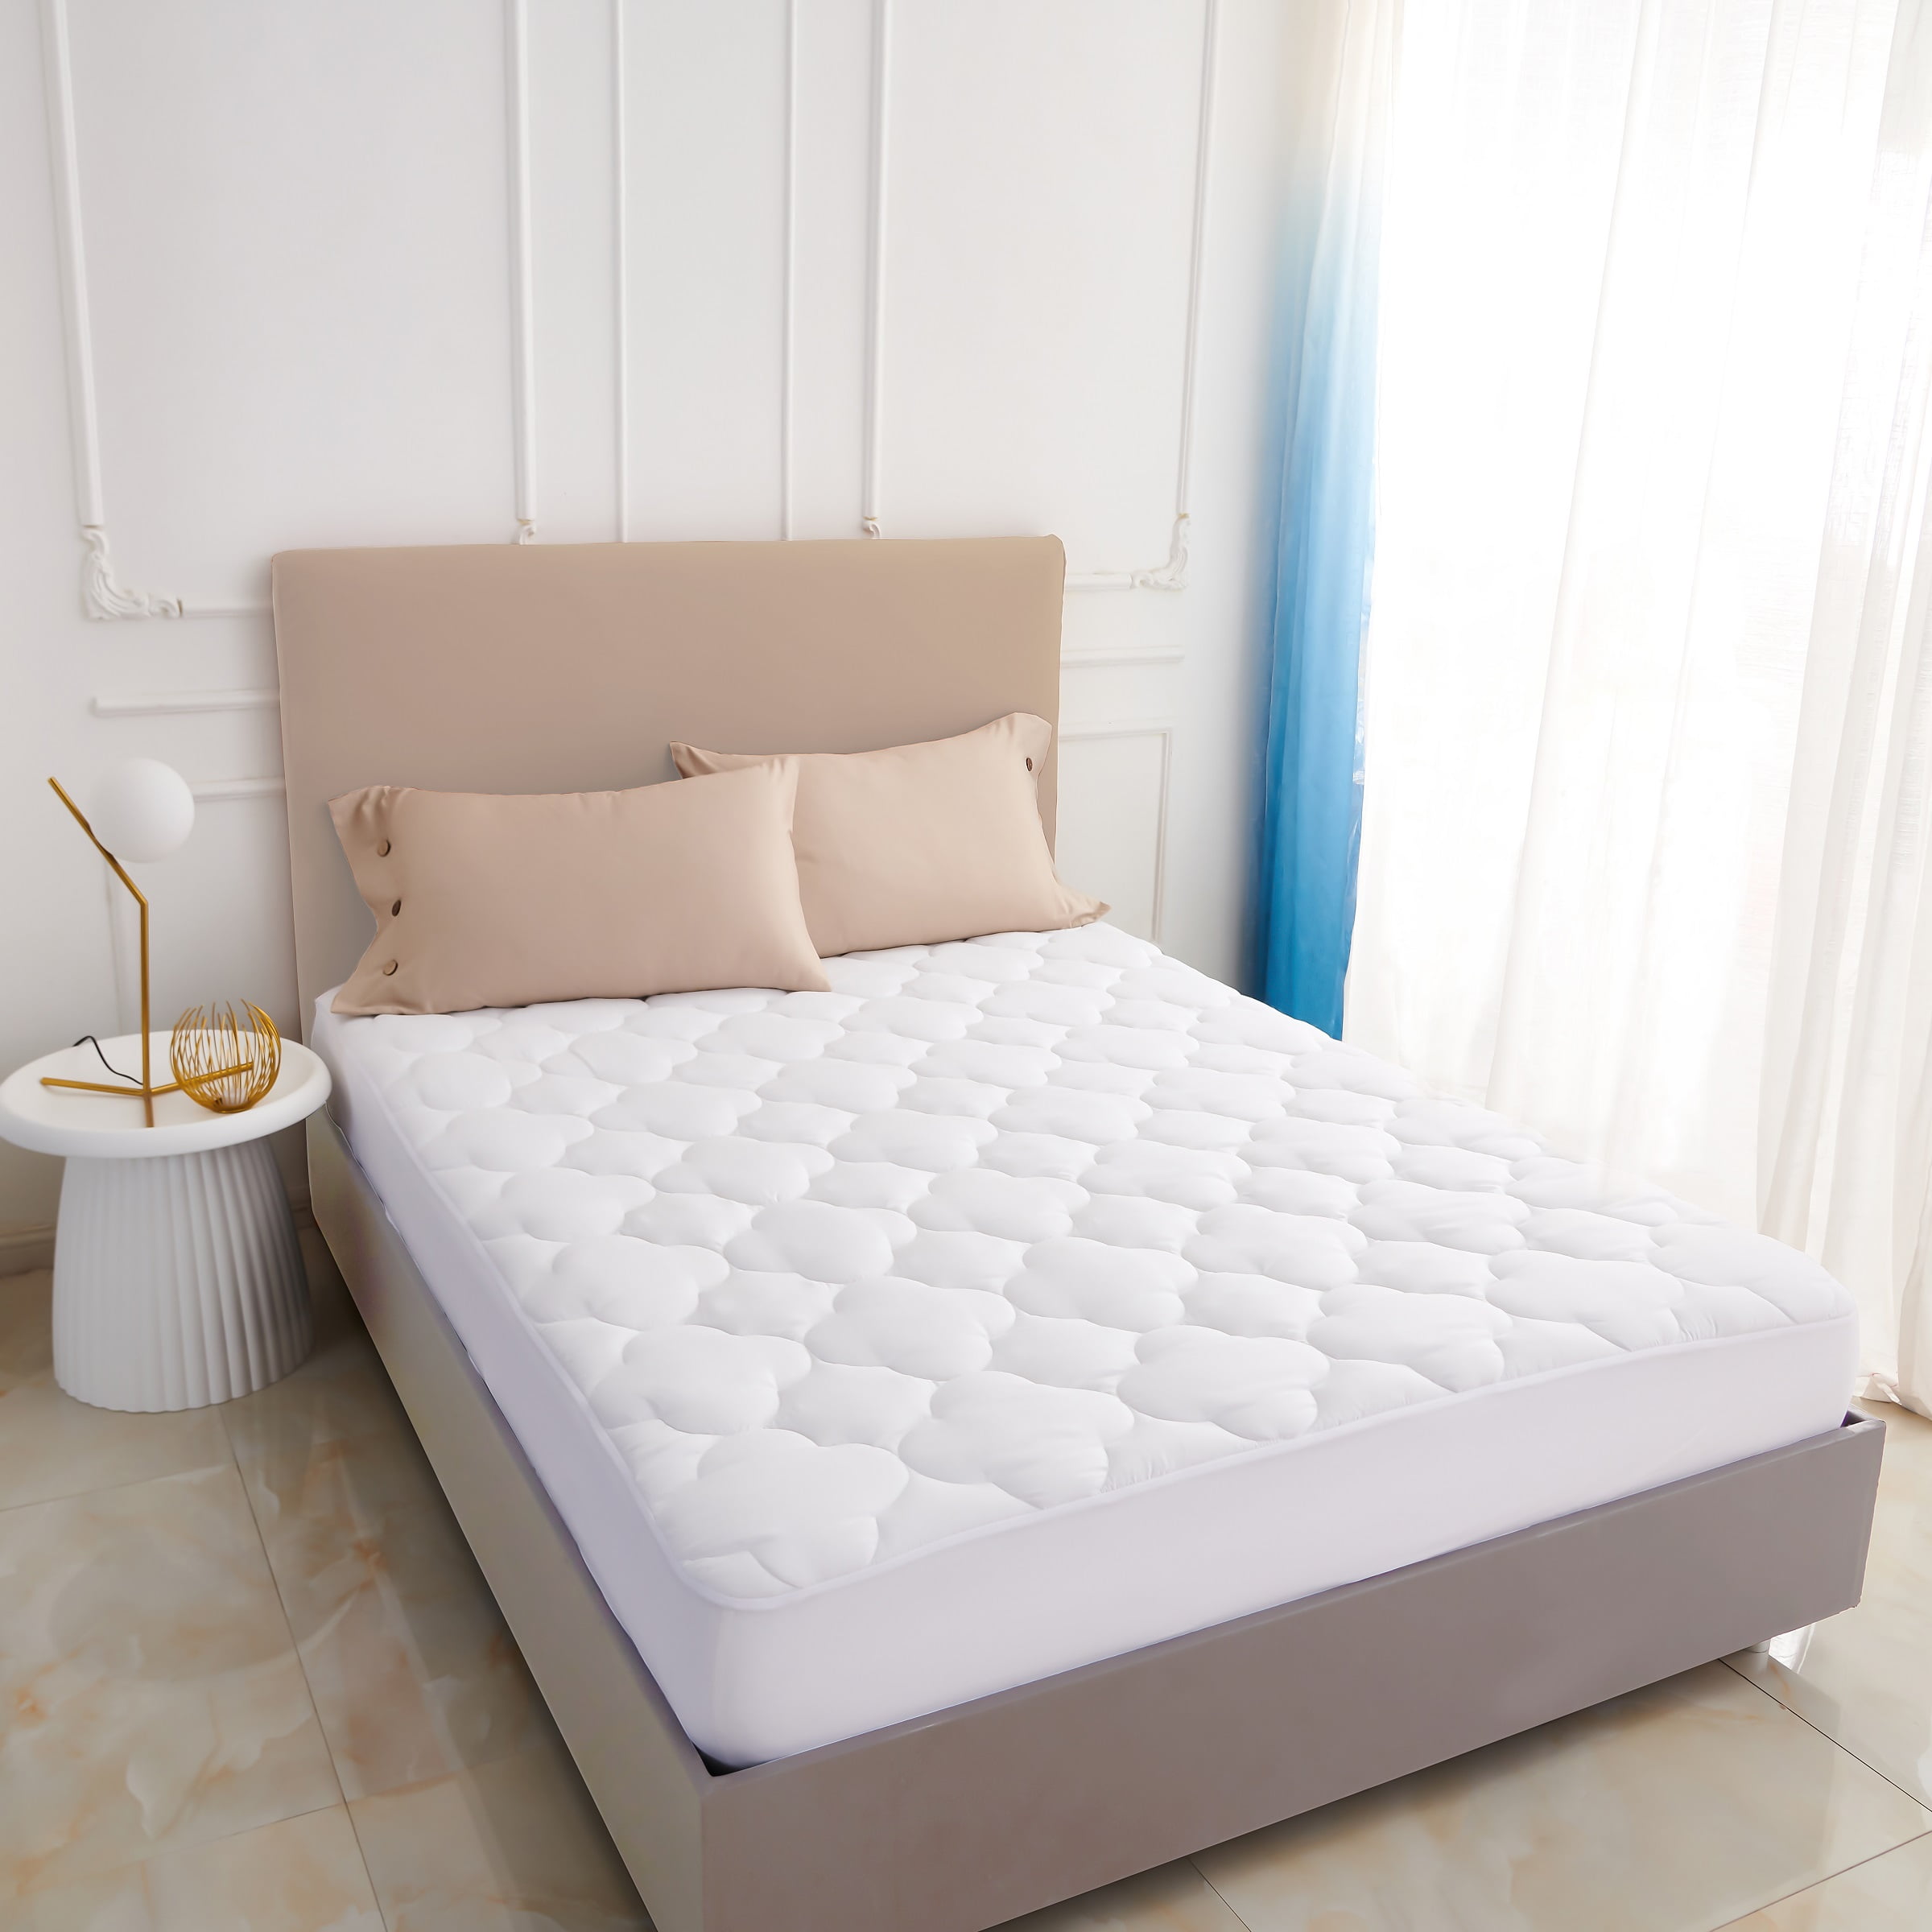 perspiration - Super-soft Preimum Bed Cover best for silent restful nights comfortable sleep Full Protects against allergens spills Breathable for cool Waterproof Mattress Pad